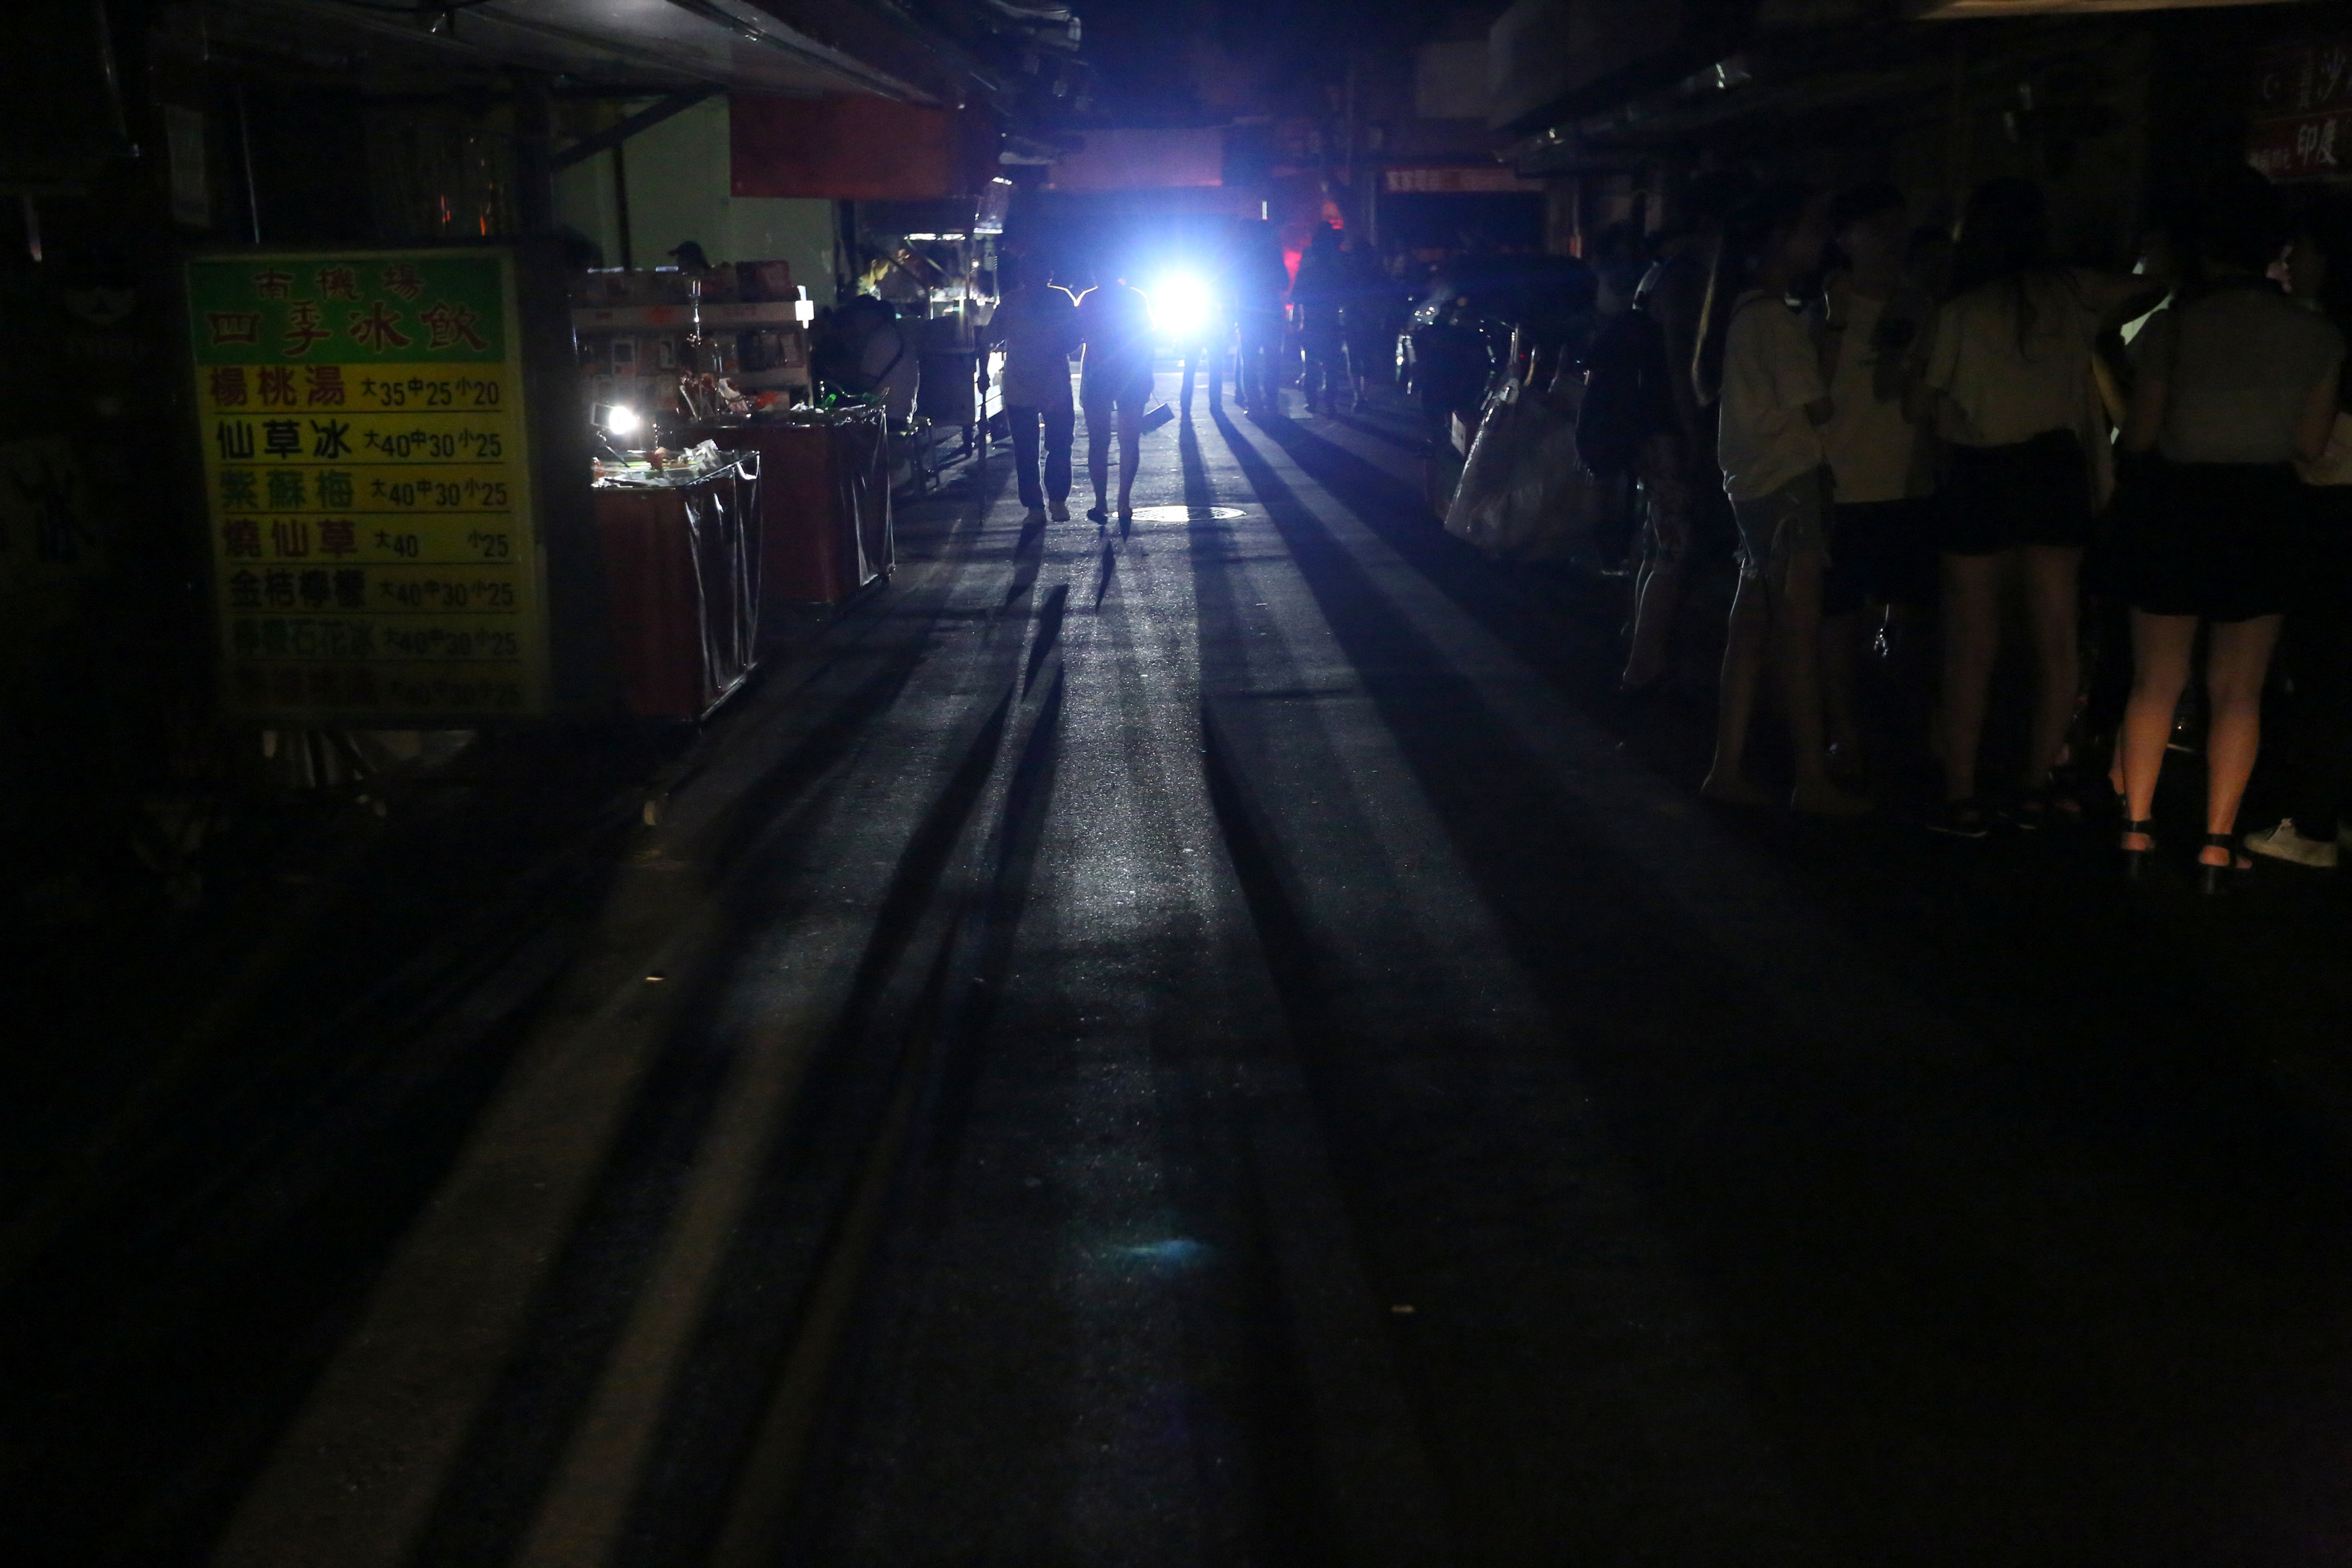 Massive power blackout affects millions of households, offices and factories in Taiwan